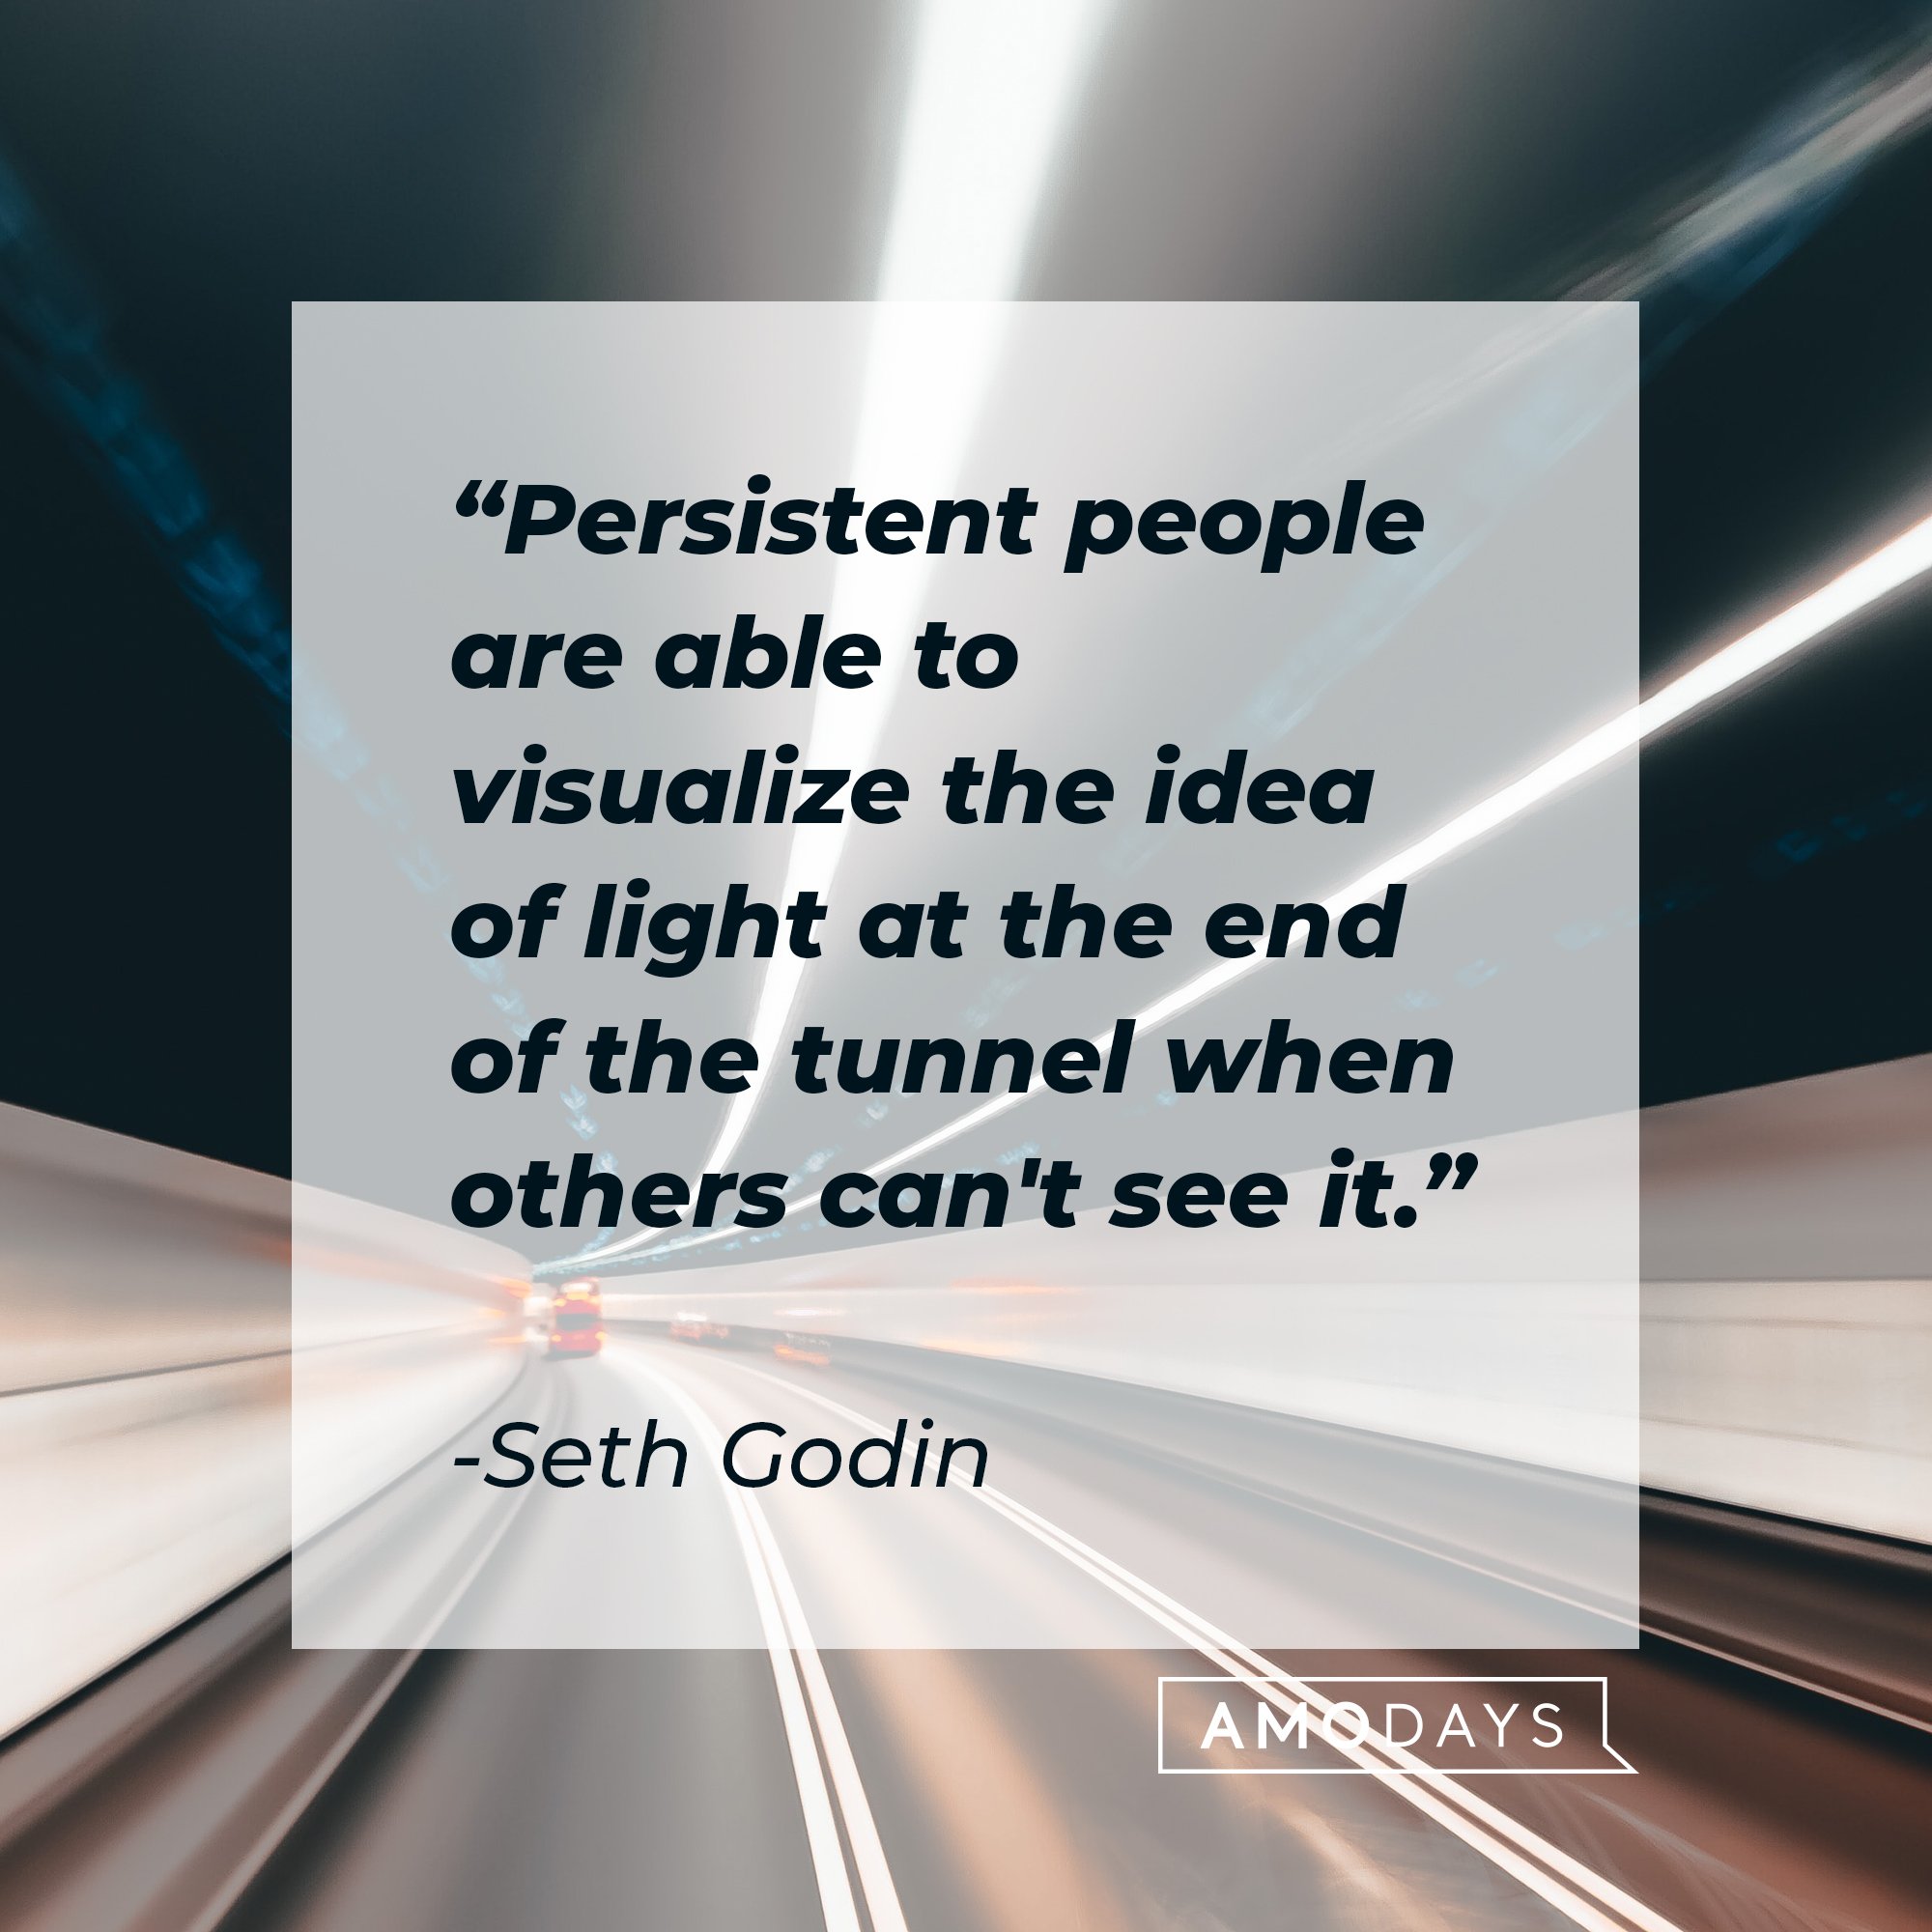 Seth Godin’s quote: "Persistent people are able to visualize the idea of light at the end of the tunnel when others can't see it." | Image: AmoDays